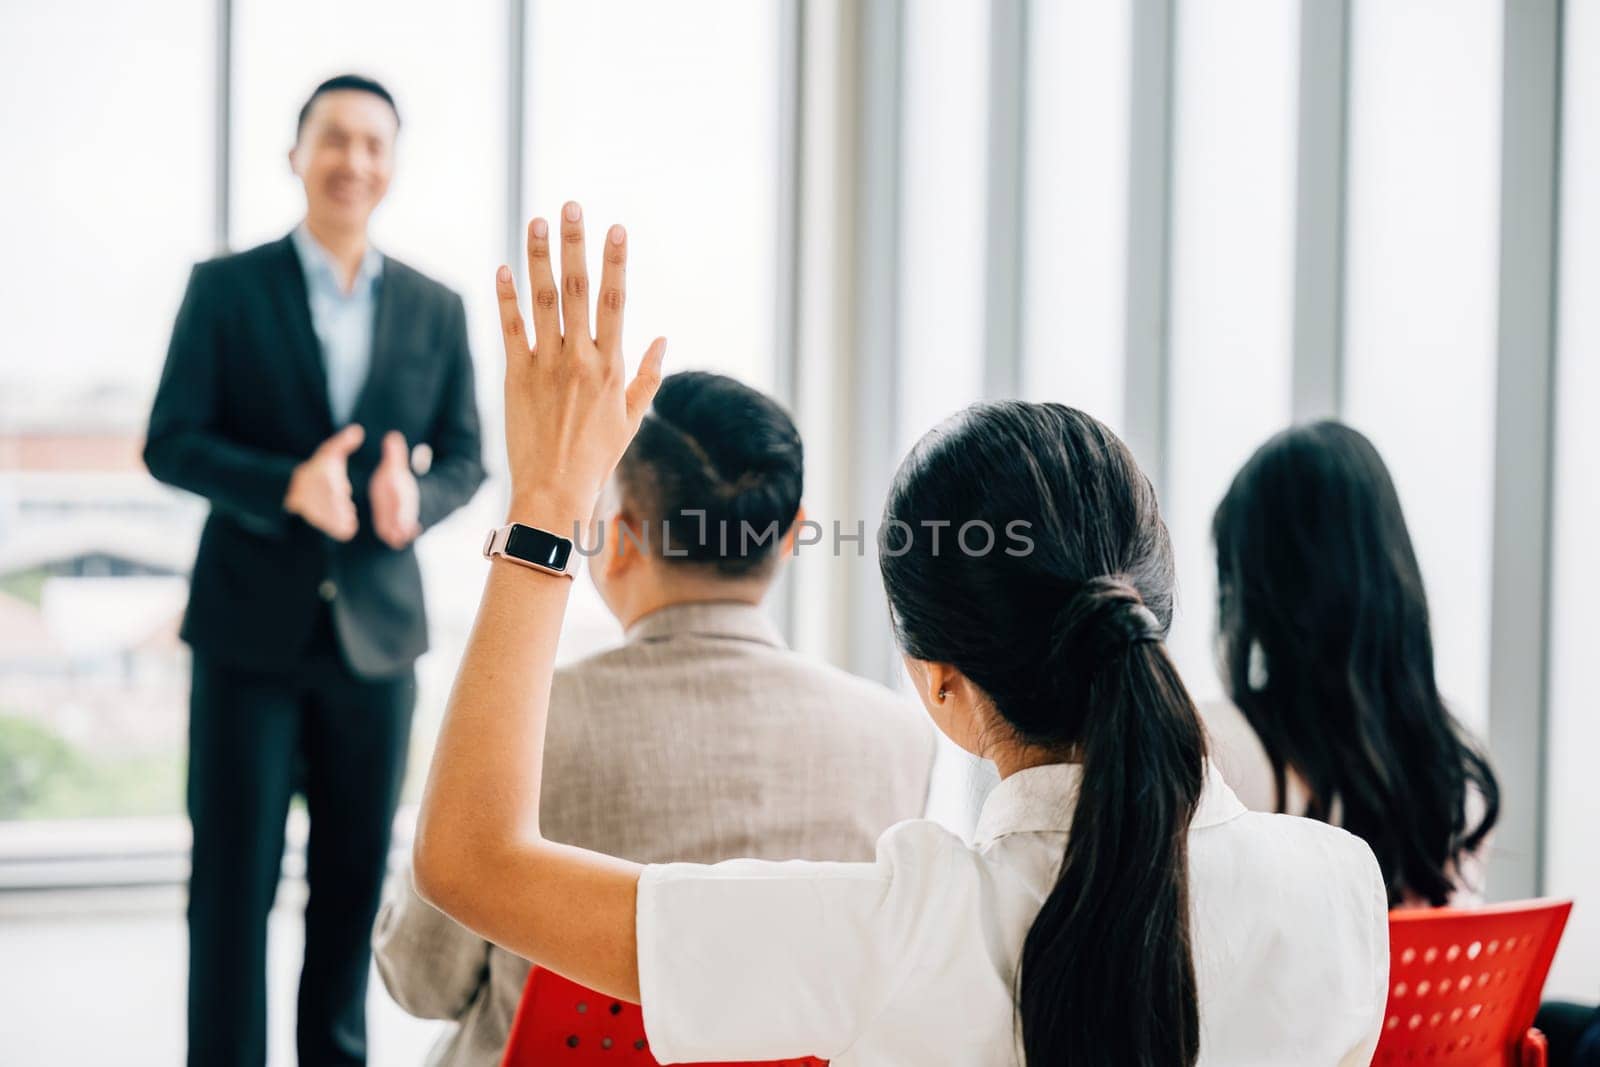 Audience engagement at a conference as hands are raised for questions, signifying the interactive nature of the meeting. A diverse group participates in a workshop or seminar presentation.